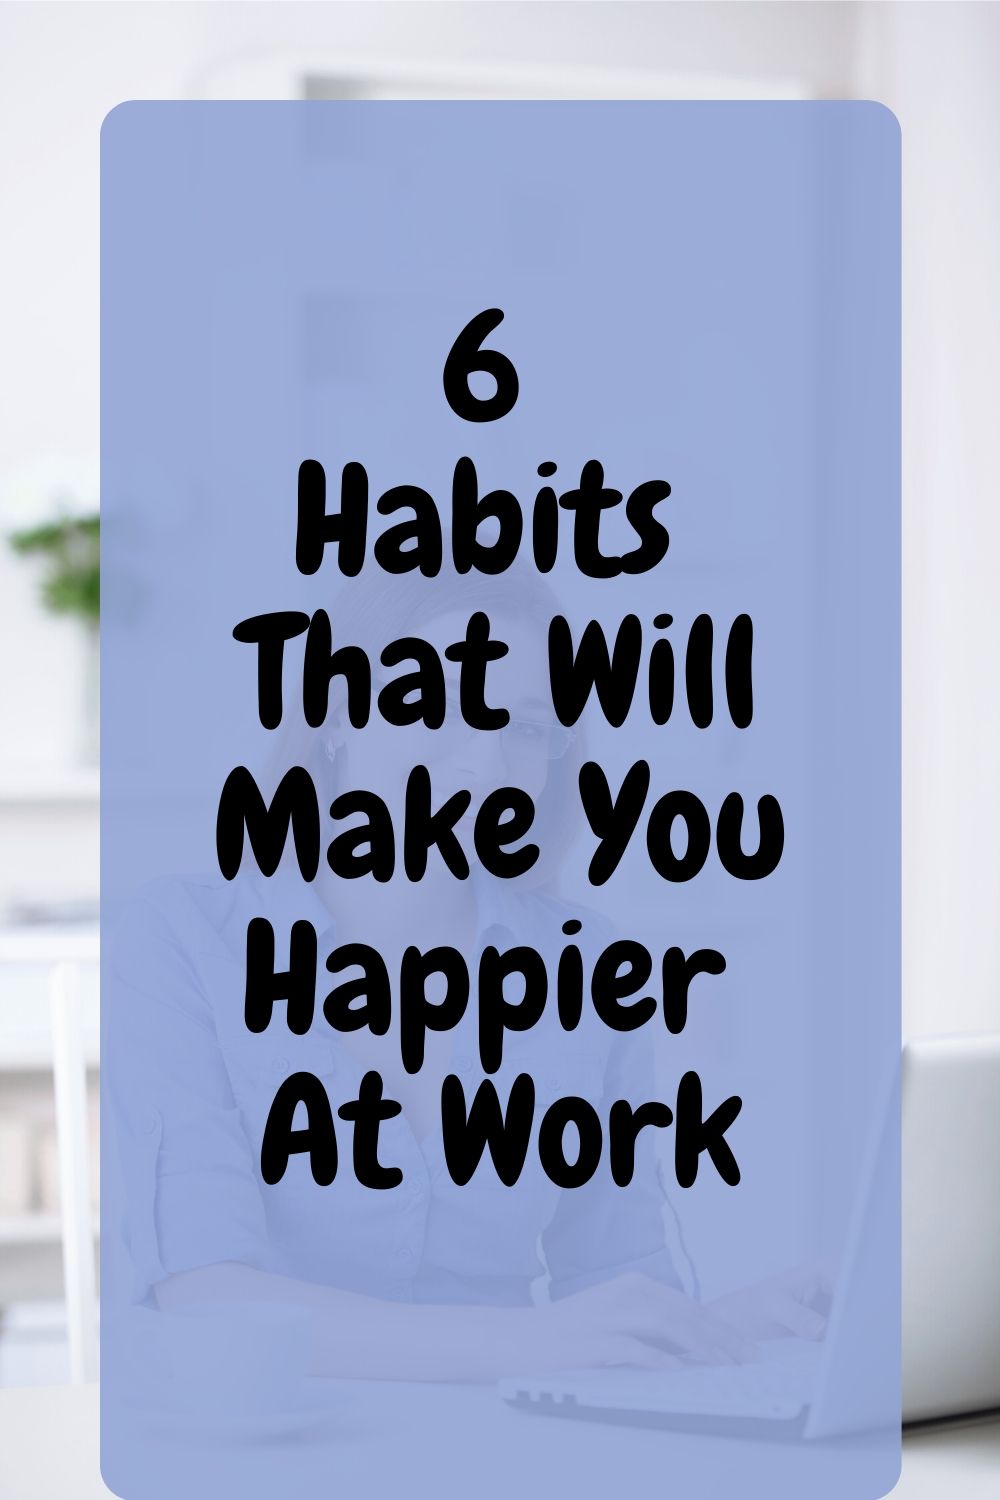 6 Habits that will Make You Happier at Work